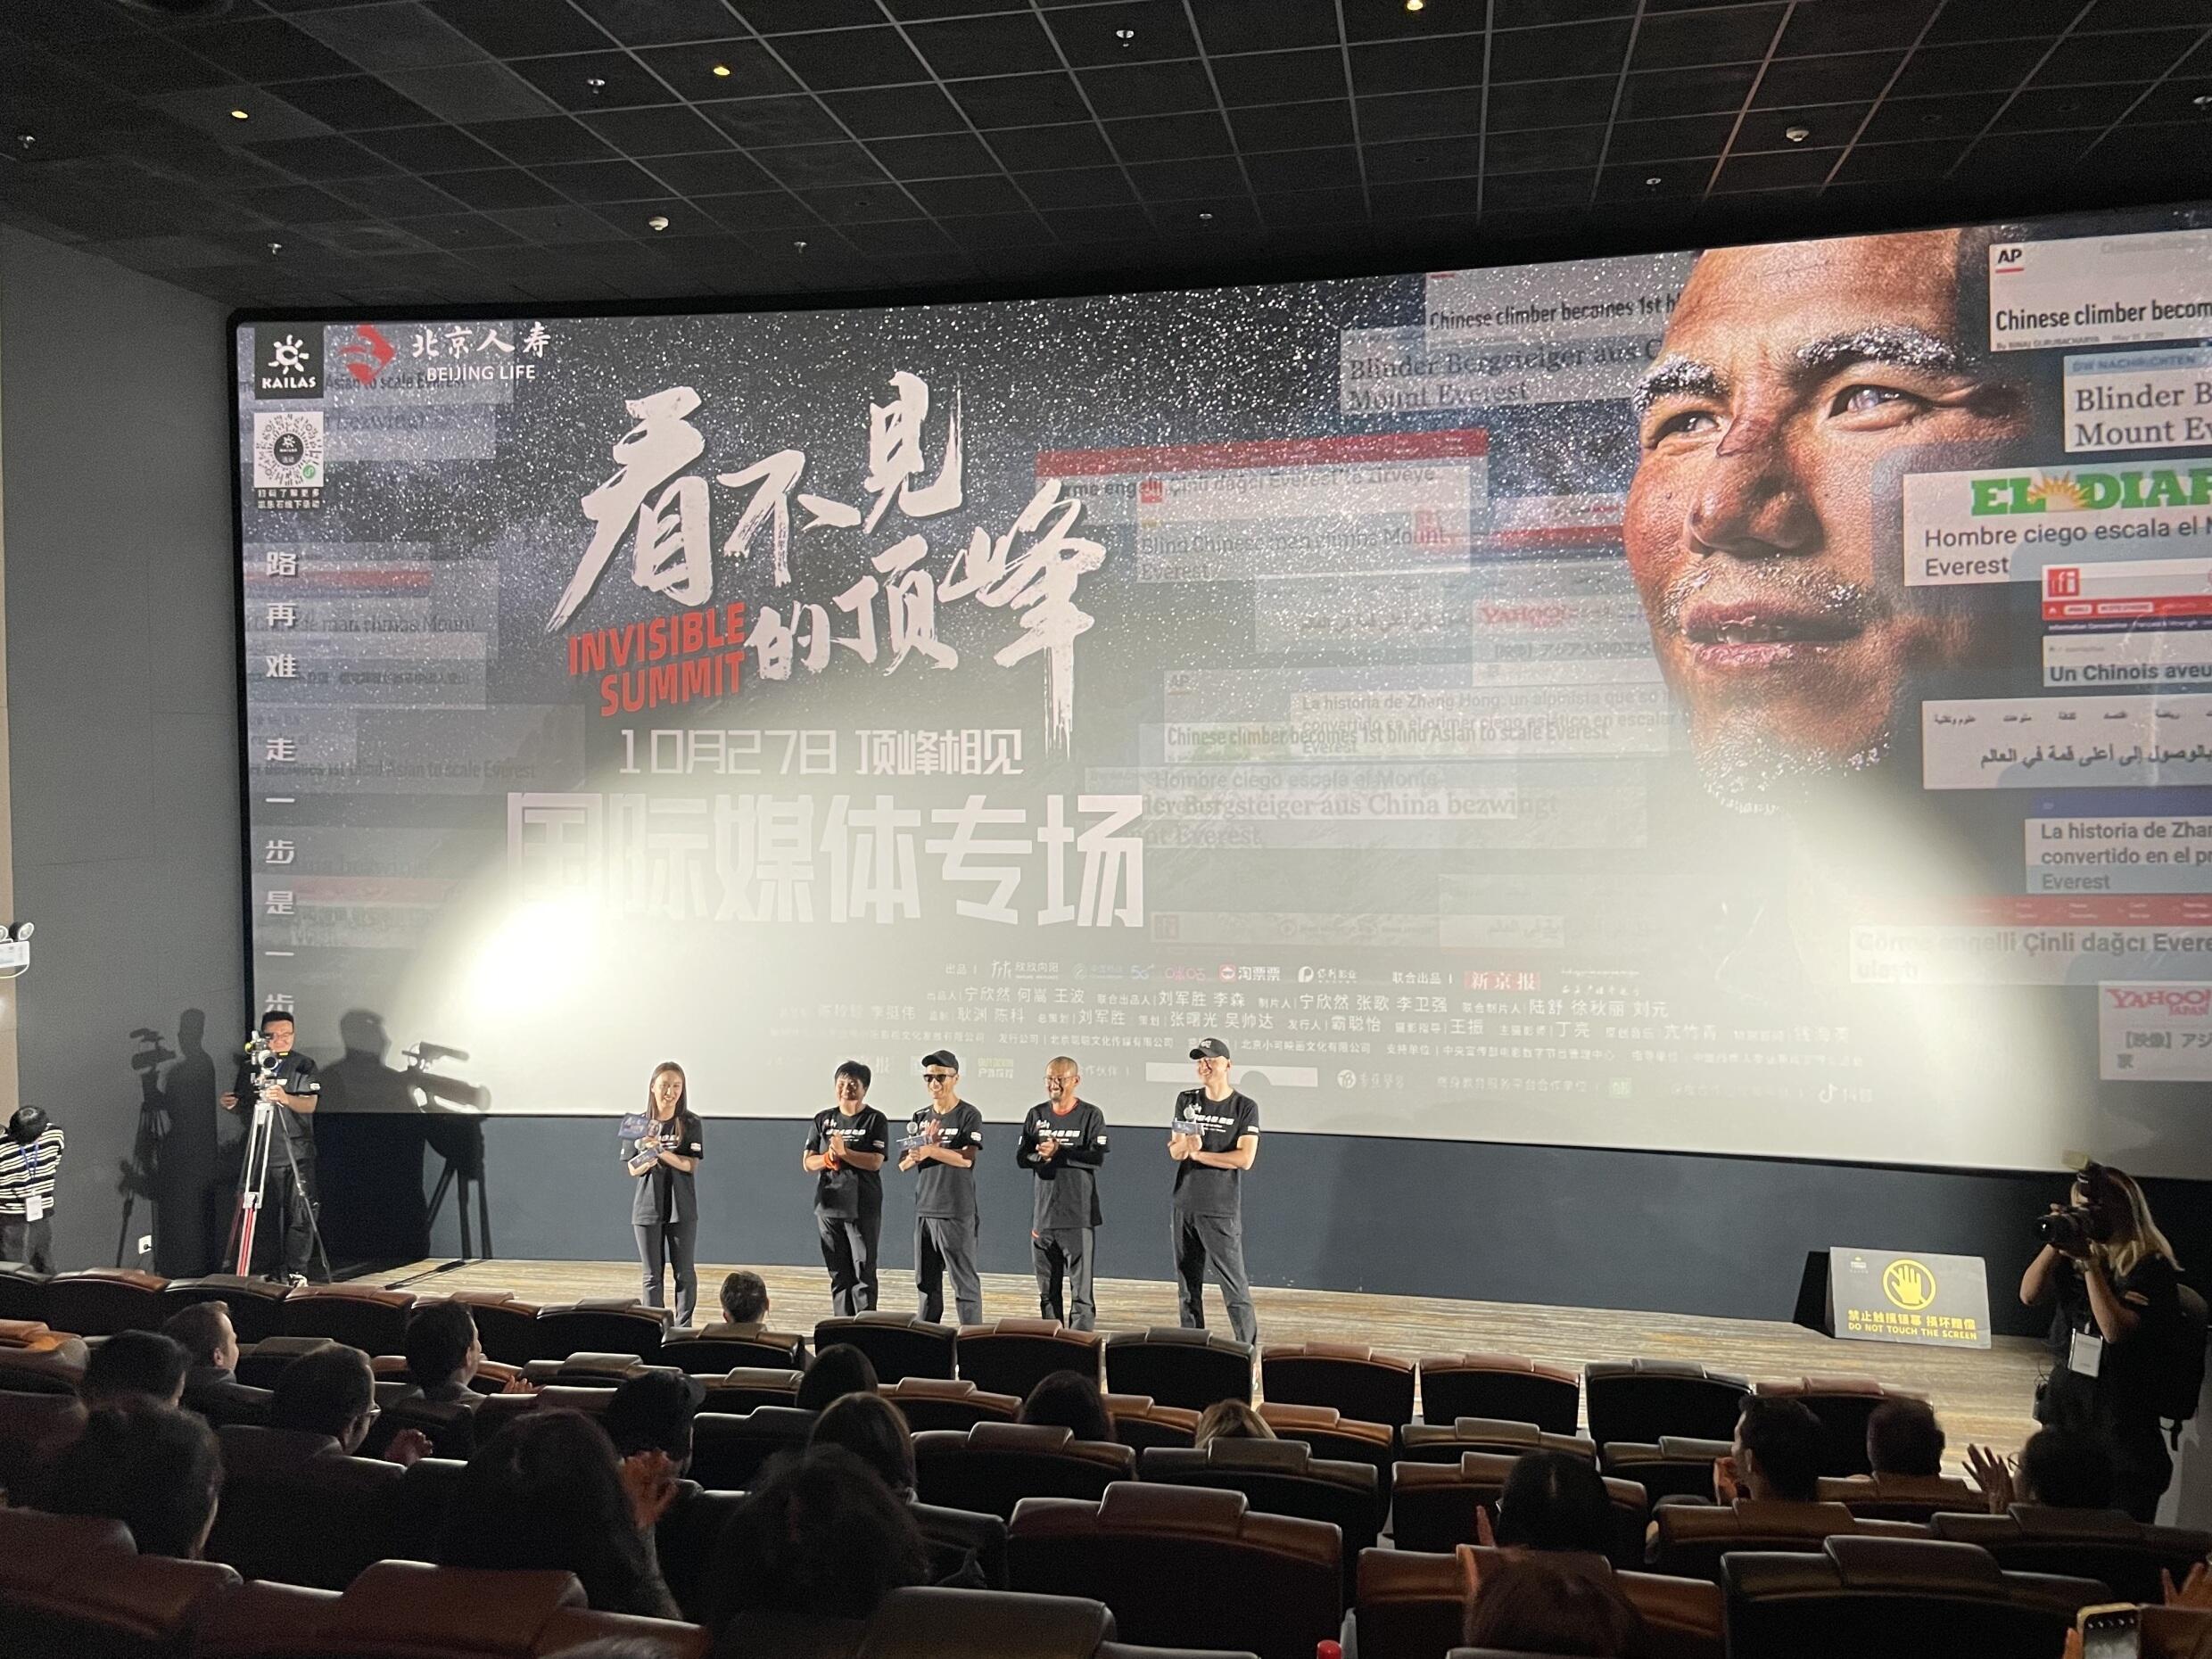 The film crew at a press screening in Beijing this week.